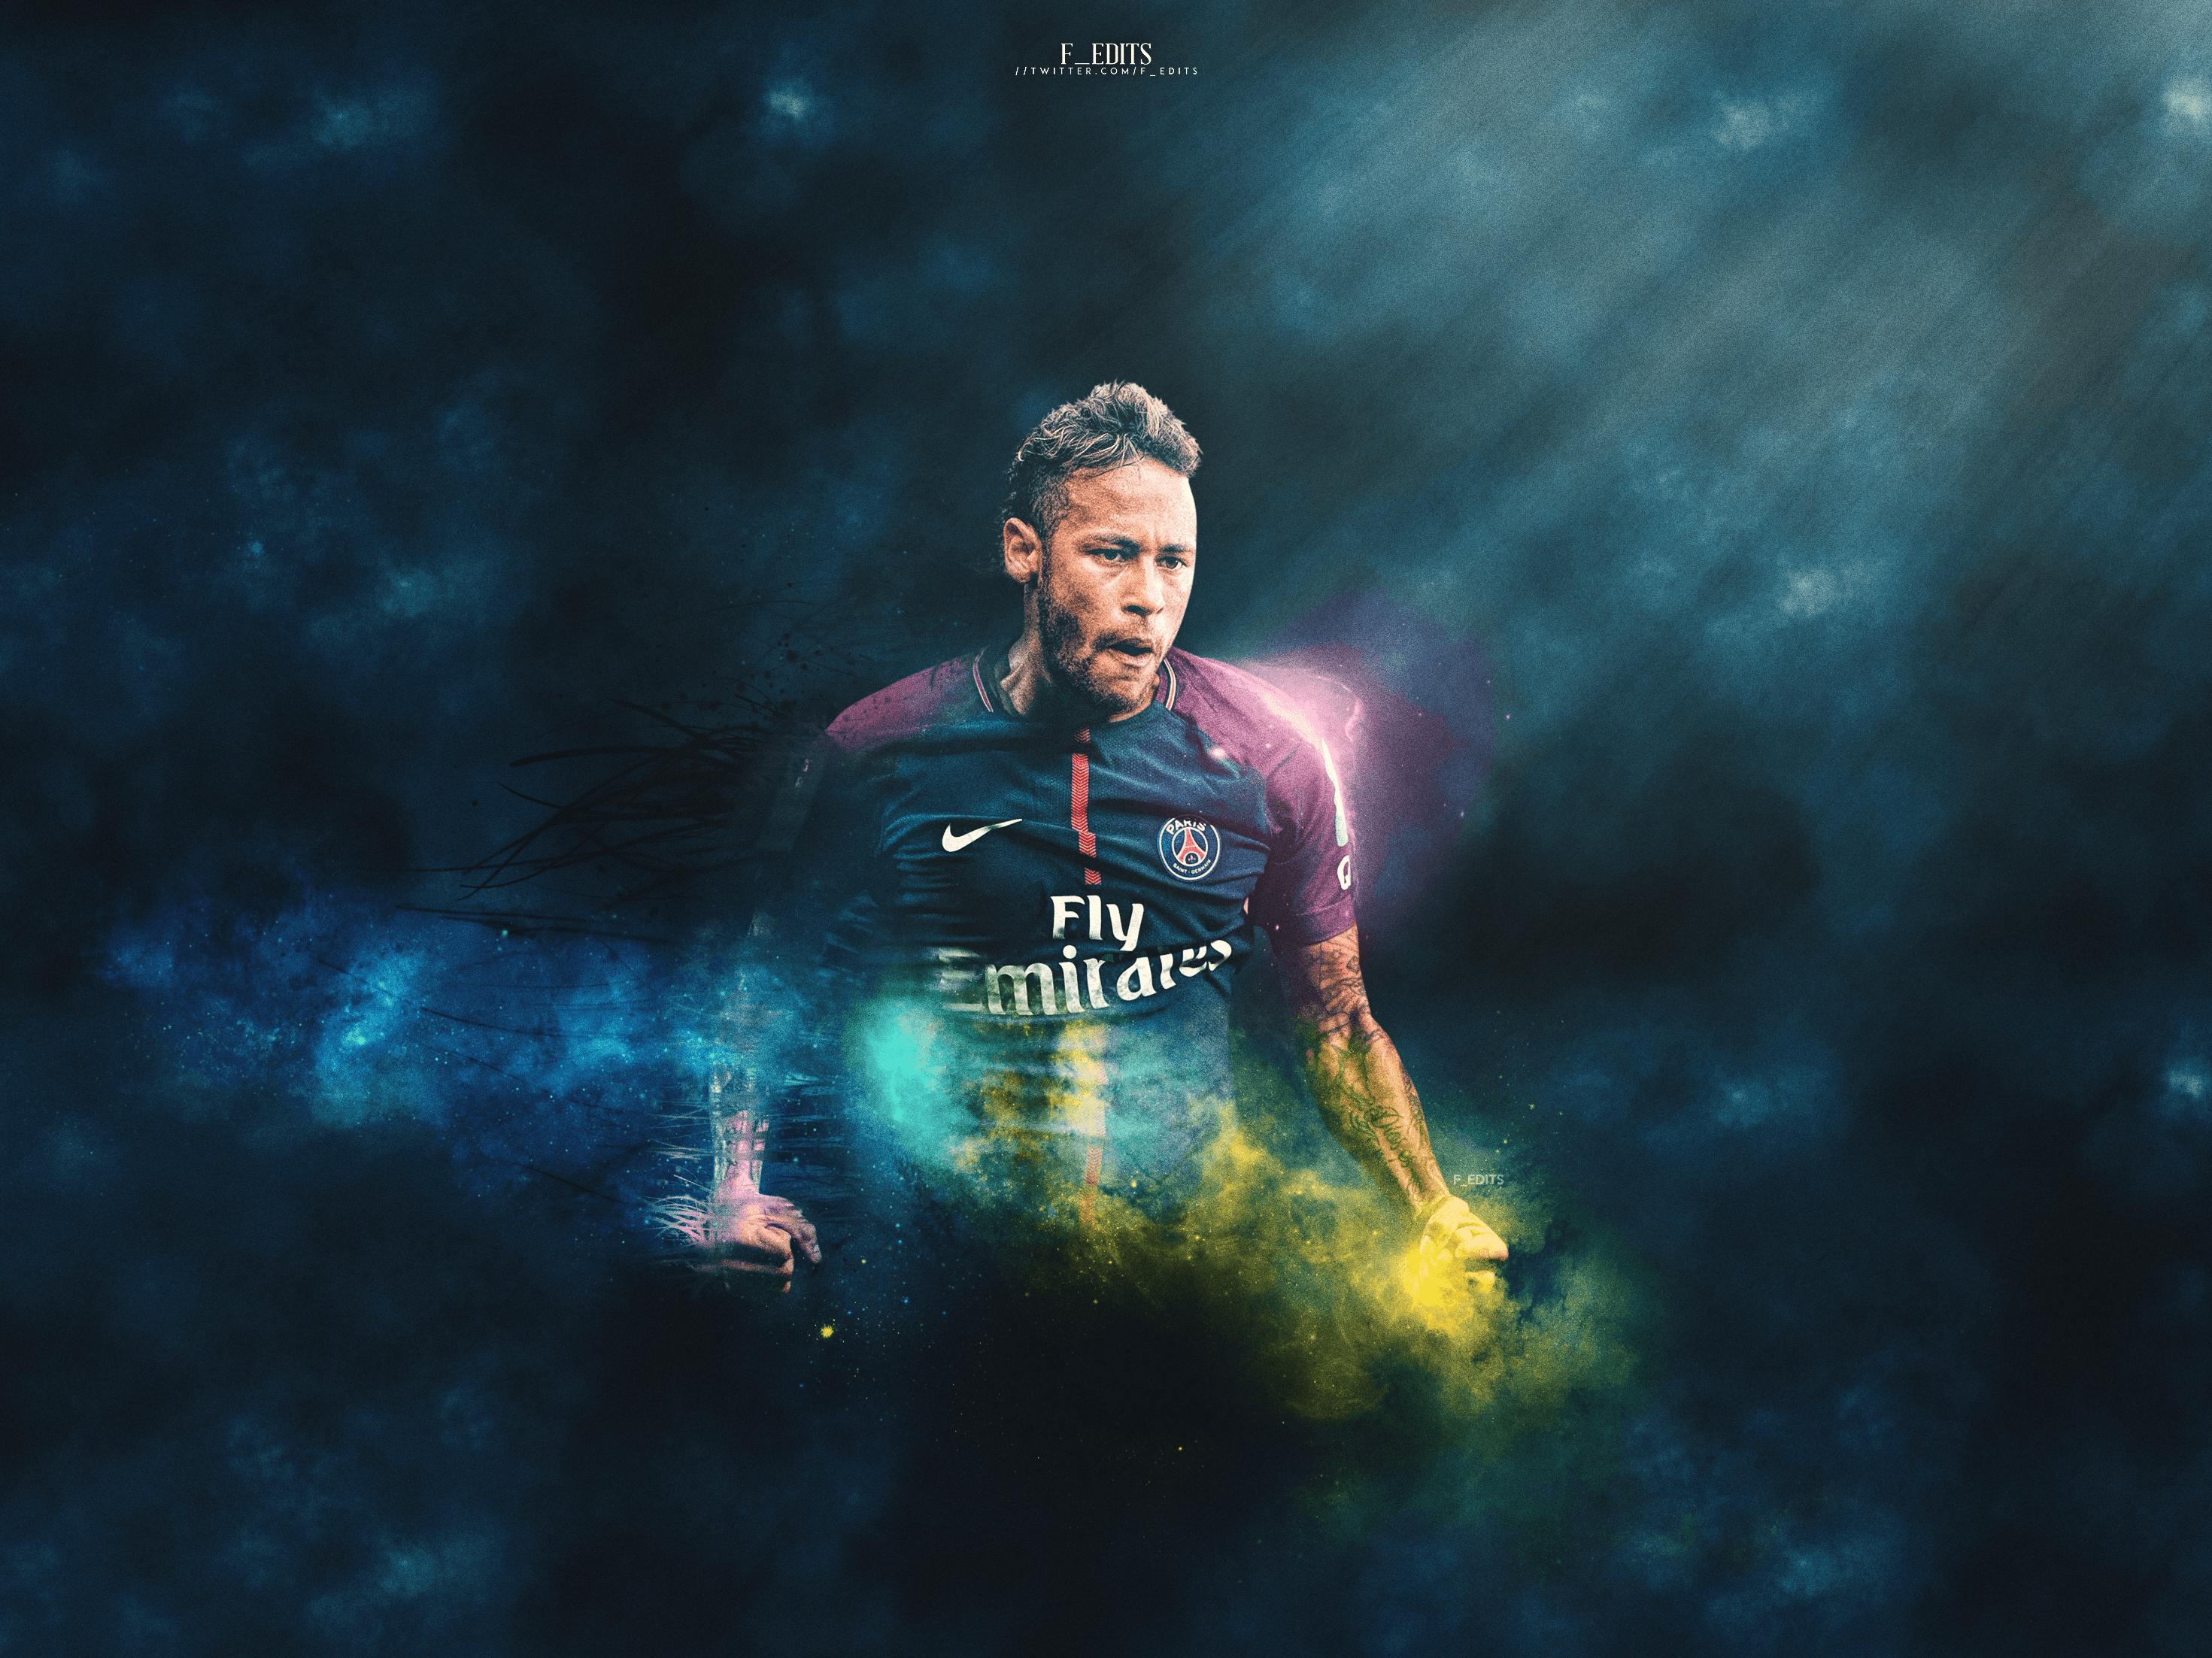 Neymar Psg Hd wallpapers collection